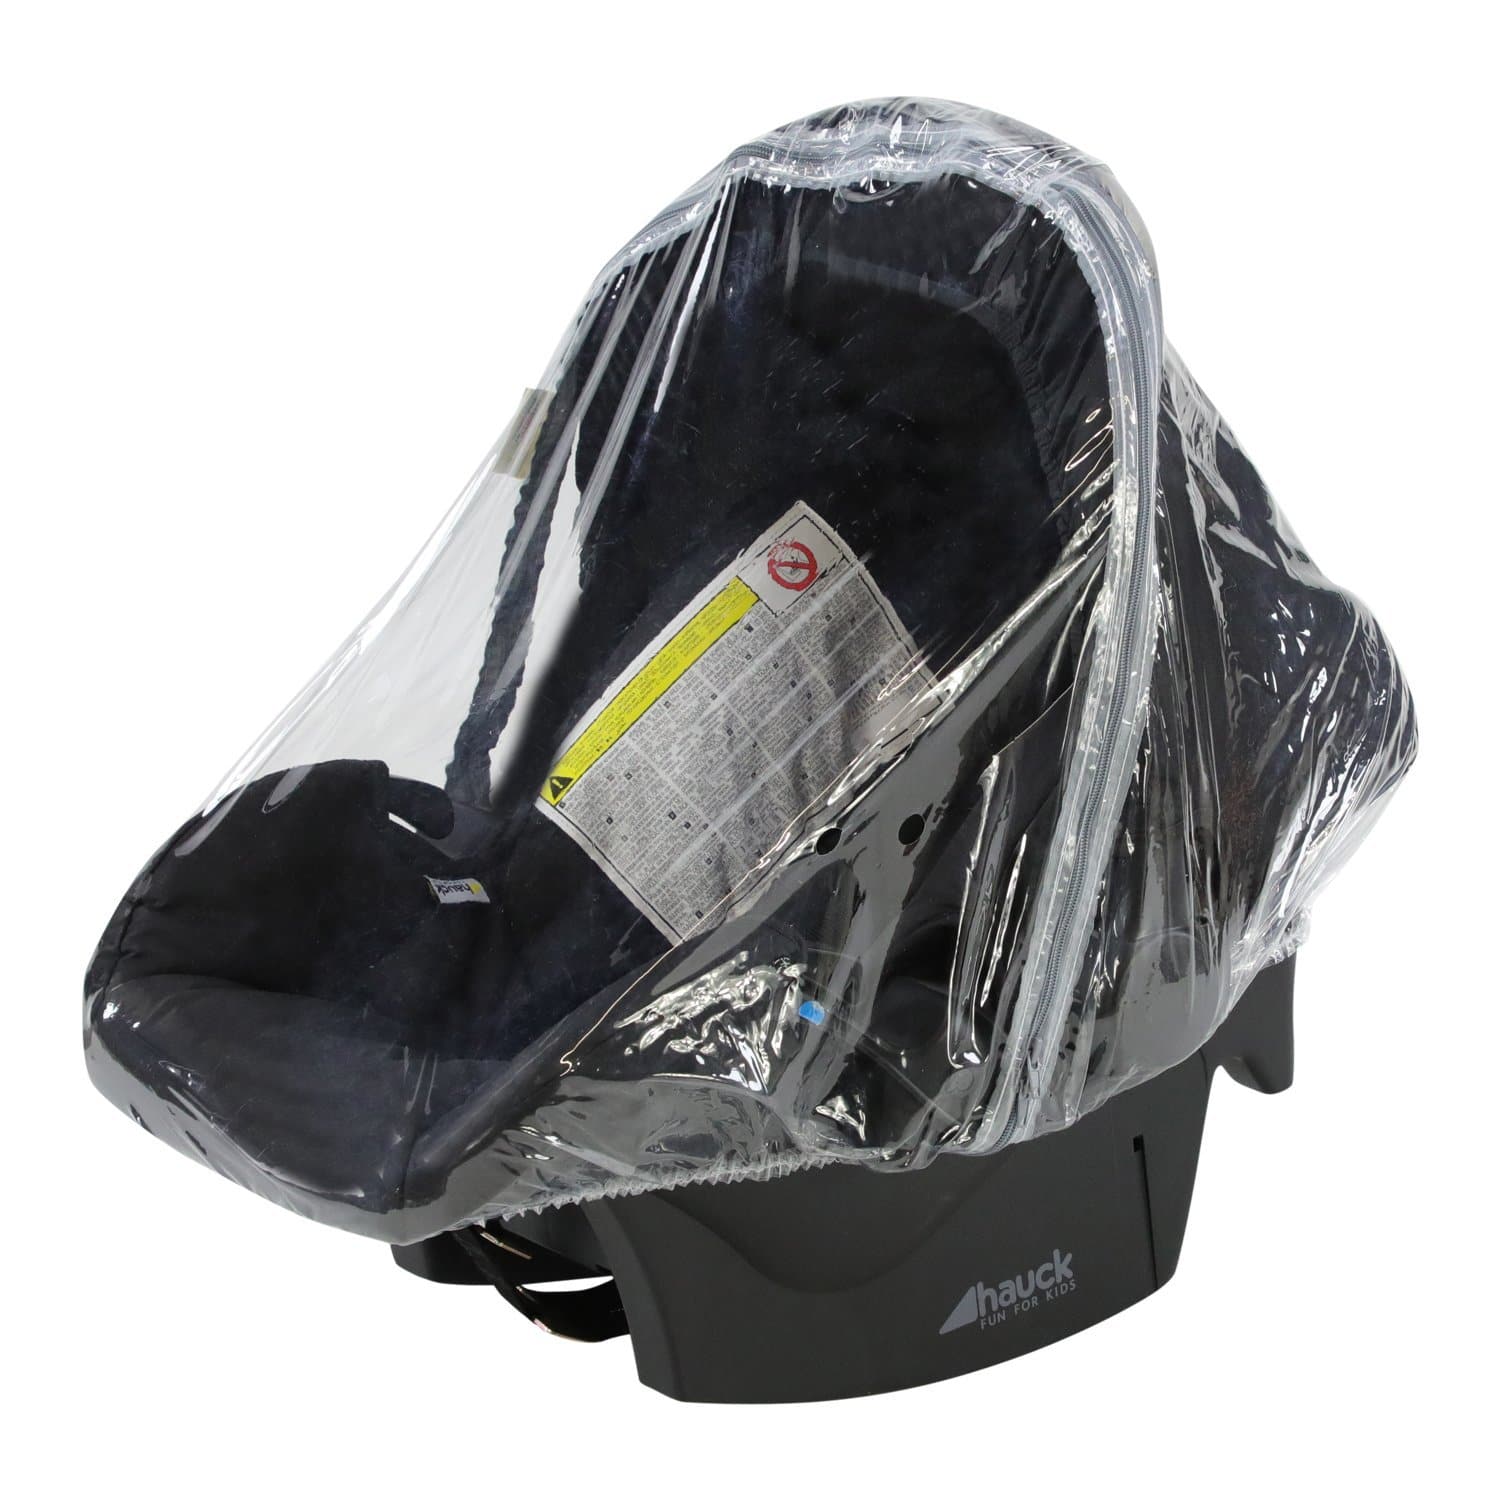 Car Seat Raincover Compatible With Baby Jogger -  | For Your Little One